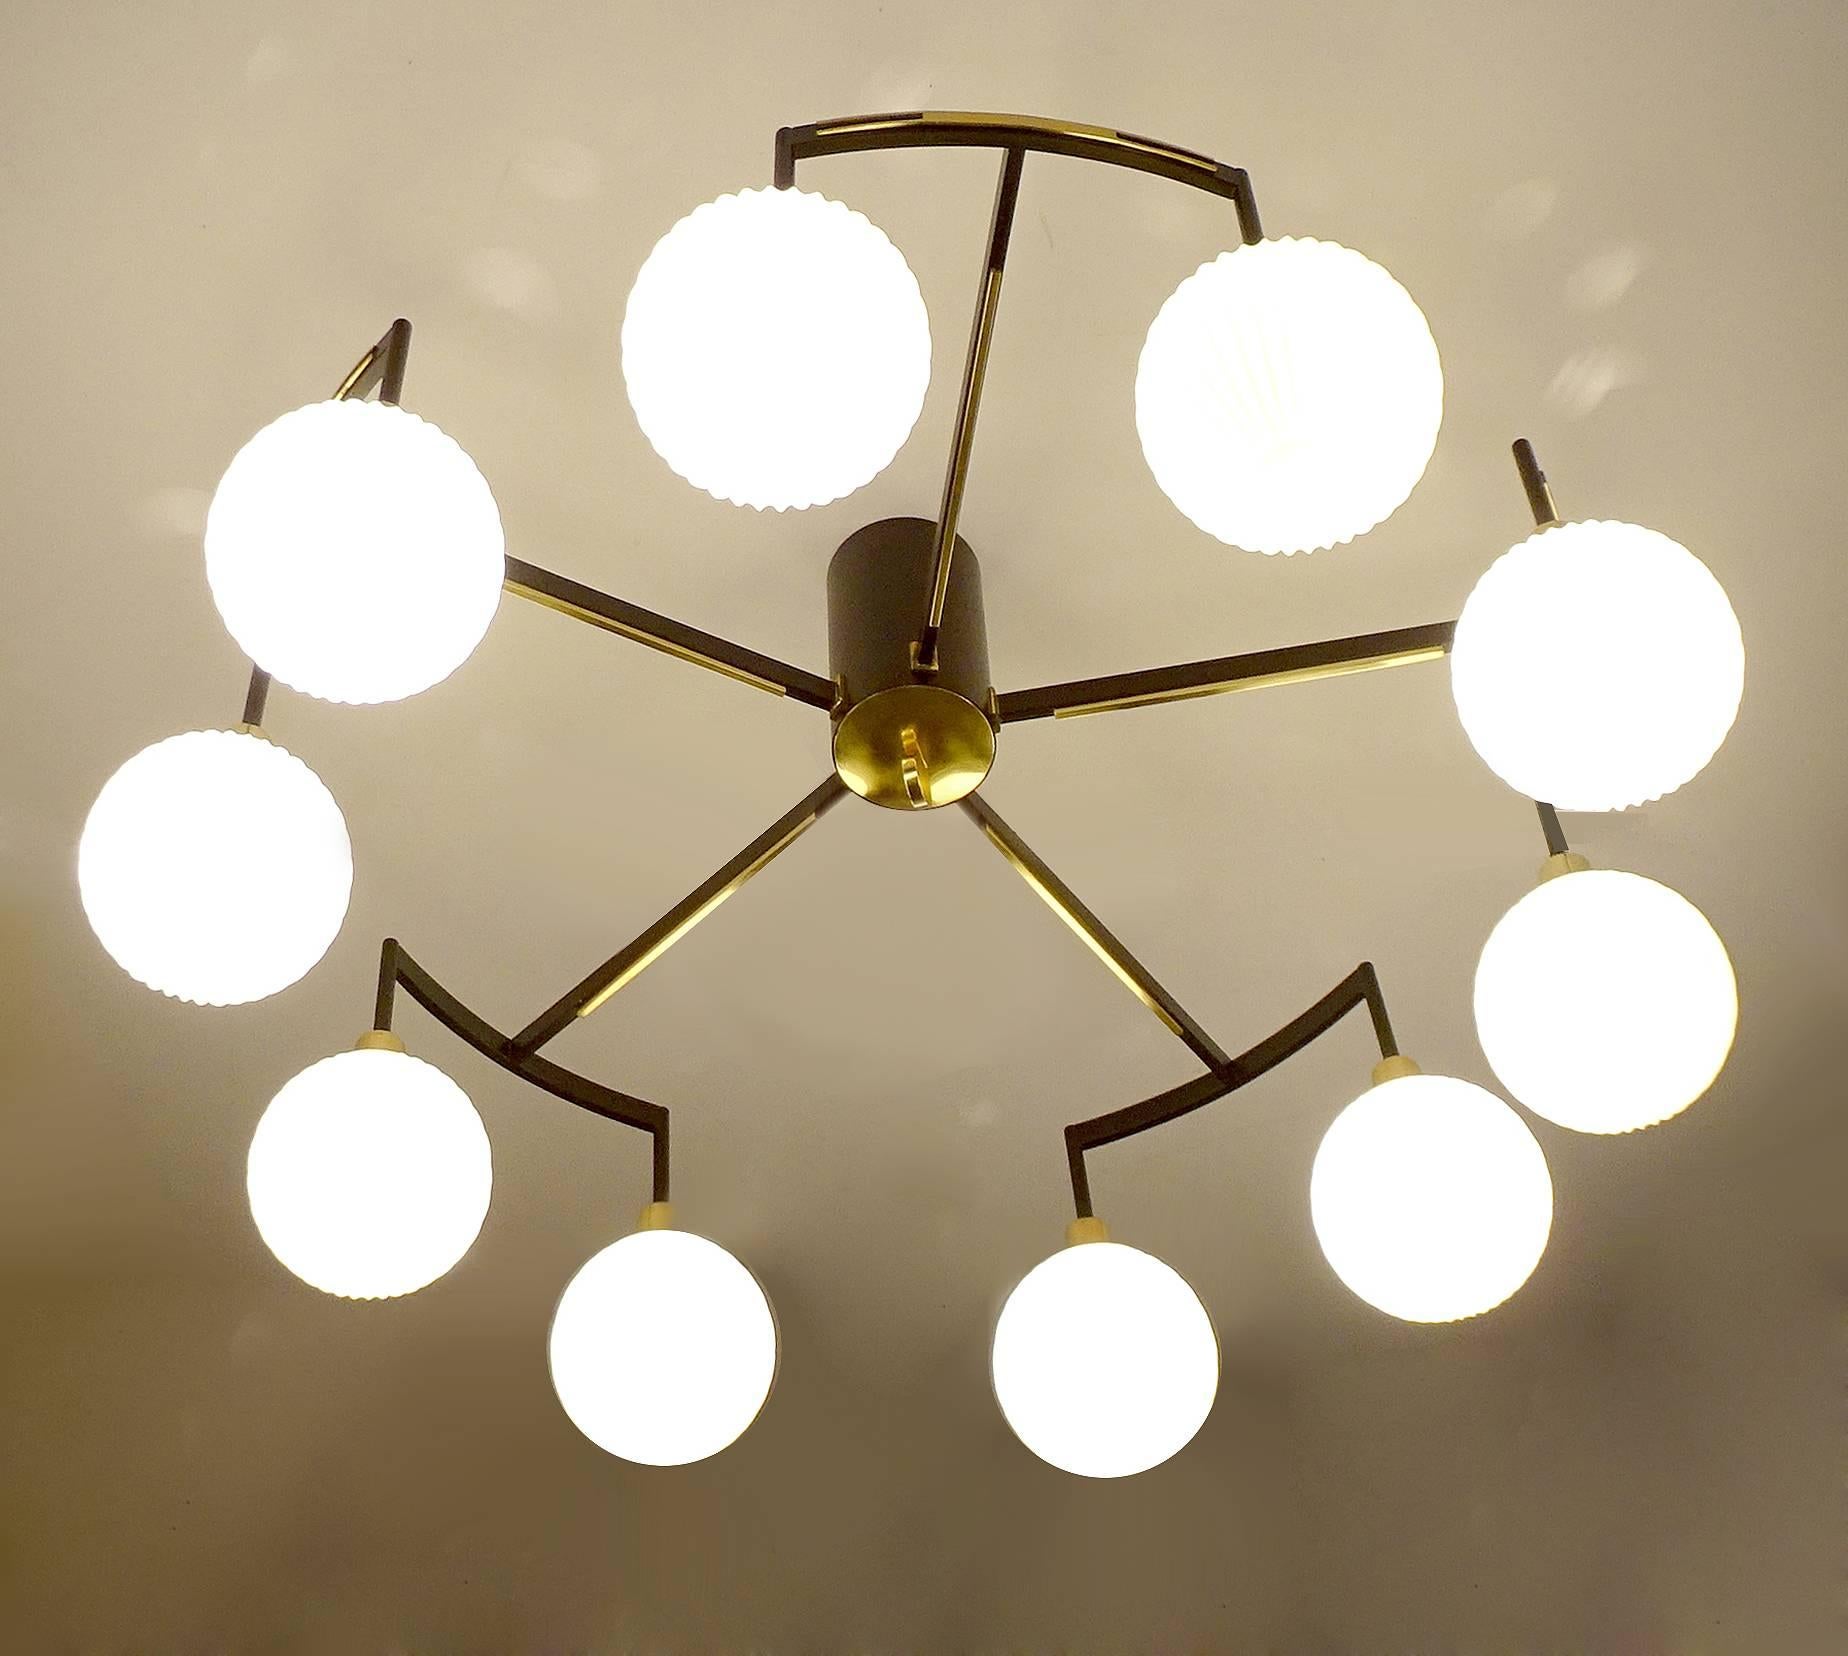 Large Stilnovo flush mount chandelier, 1960s, black enameled and brass structure with 10 opaline ribbed glass globes.
Height
33.46 in. / 35 cm
Diameter
 13.78 in. / 85 cm 
10 candelabra size bulbs, each 40 watts -  rewired, may require some hardware